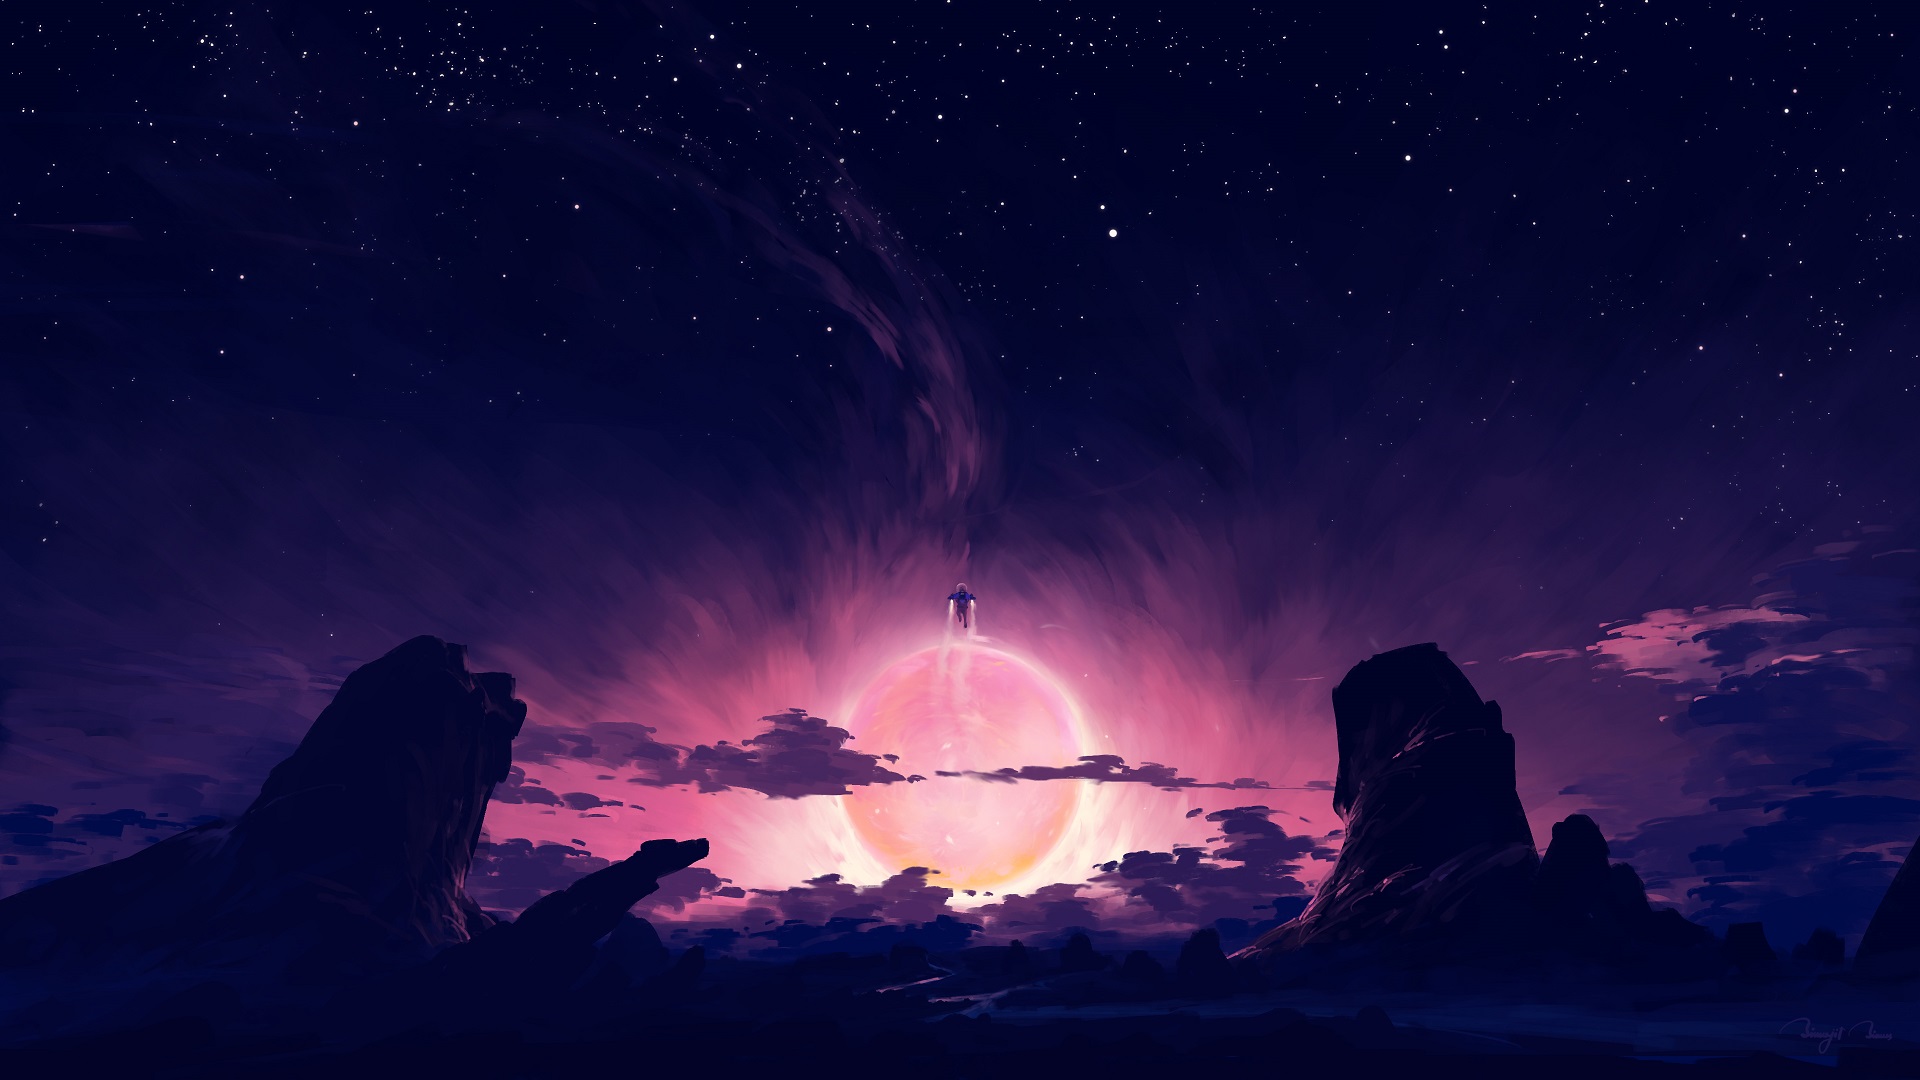 General 1920x1080 digital painting landscape night sky mountains clouds astronaut Voyager BisBiswas